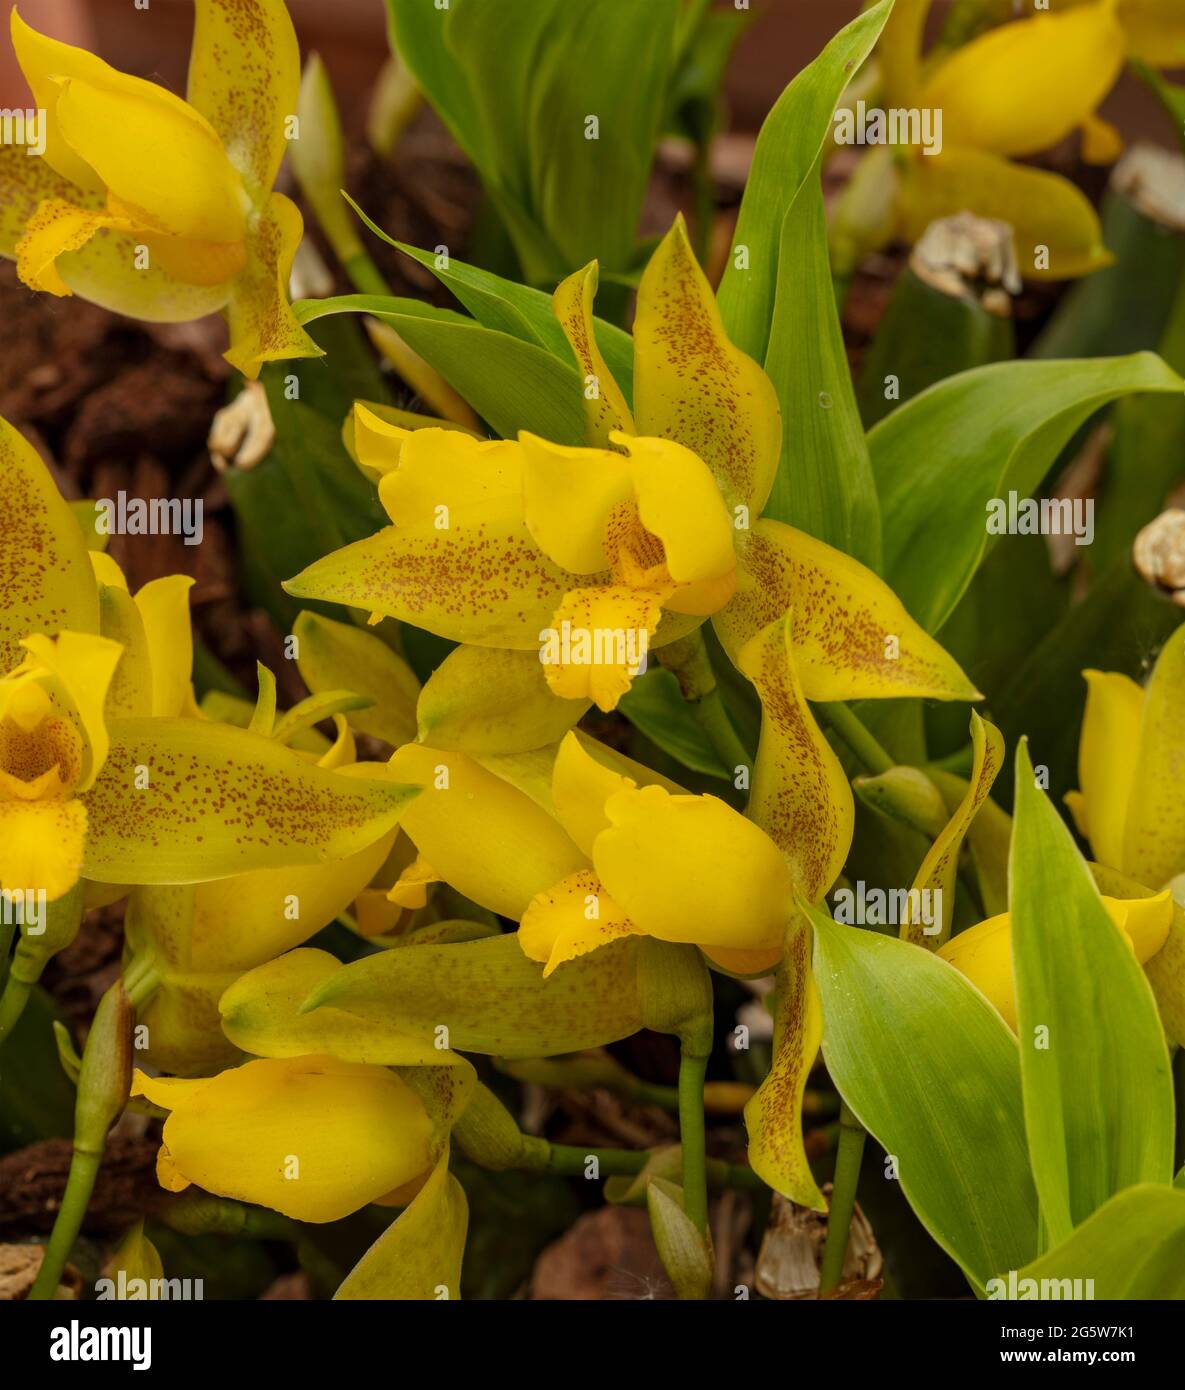 Lycaste Chiltern Hundreds, beautiful yellow orchid flower portrait Stock Photo